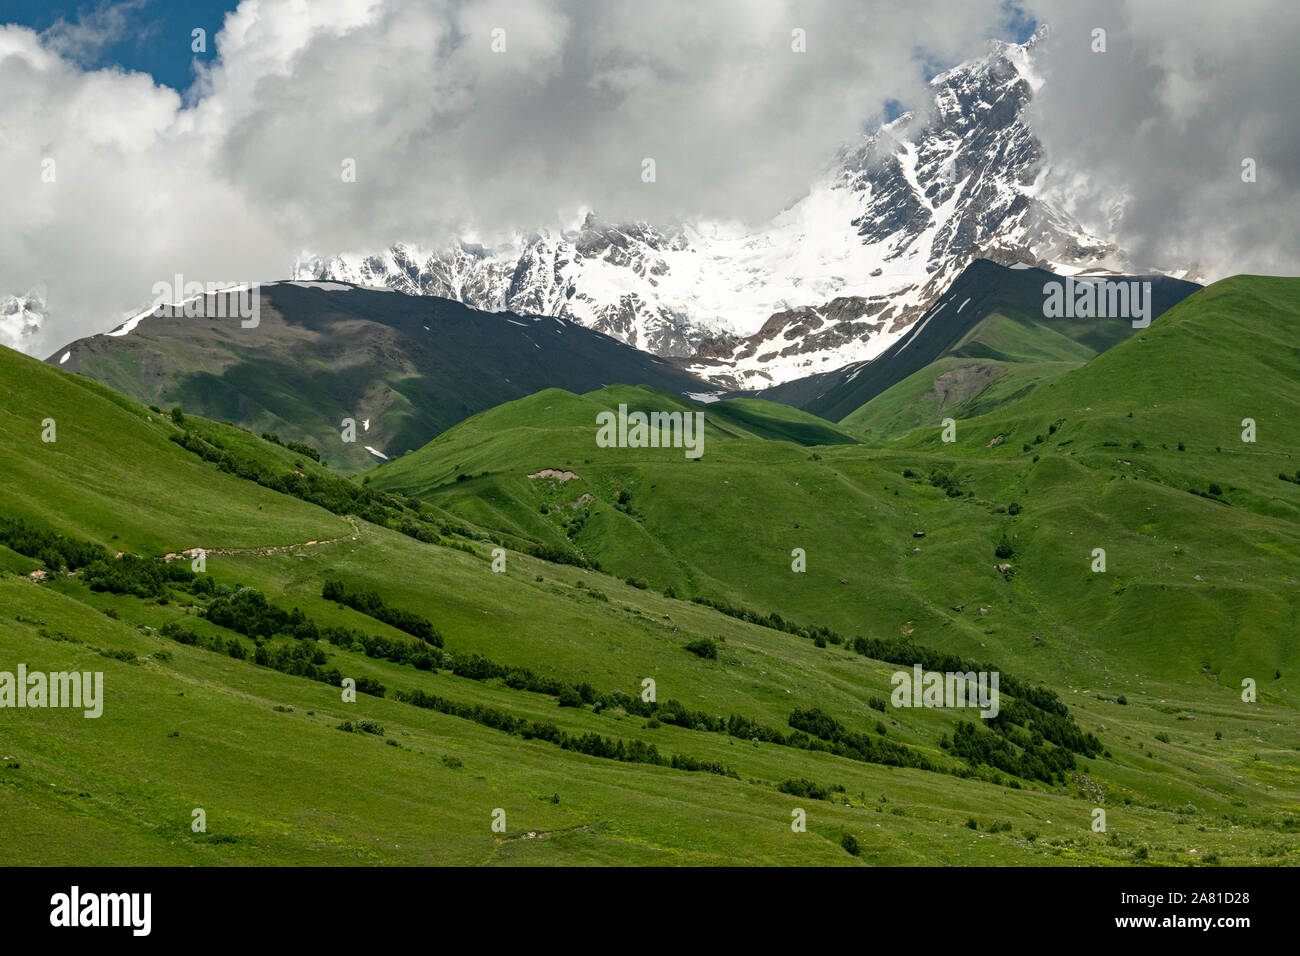 Grassy slopes of Caucasus Mountains, with snow-capped peaks in the background. Adishi valley, Upper Svaneti, Georgia. Stock Photo